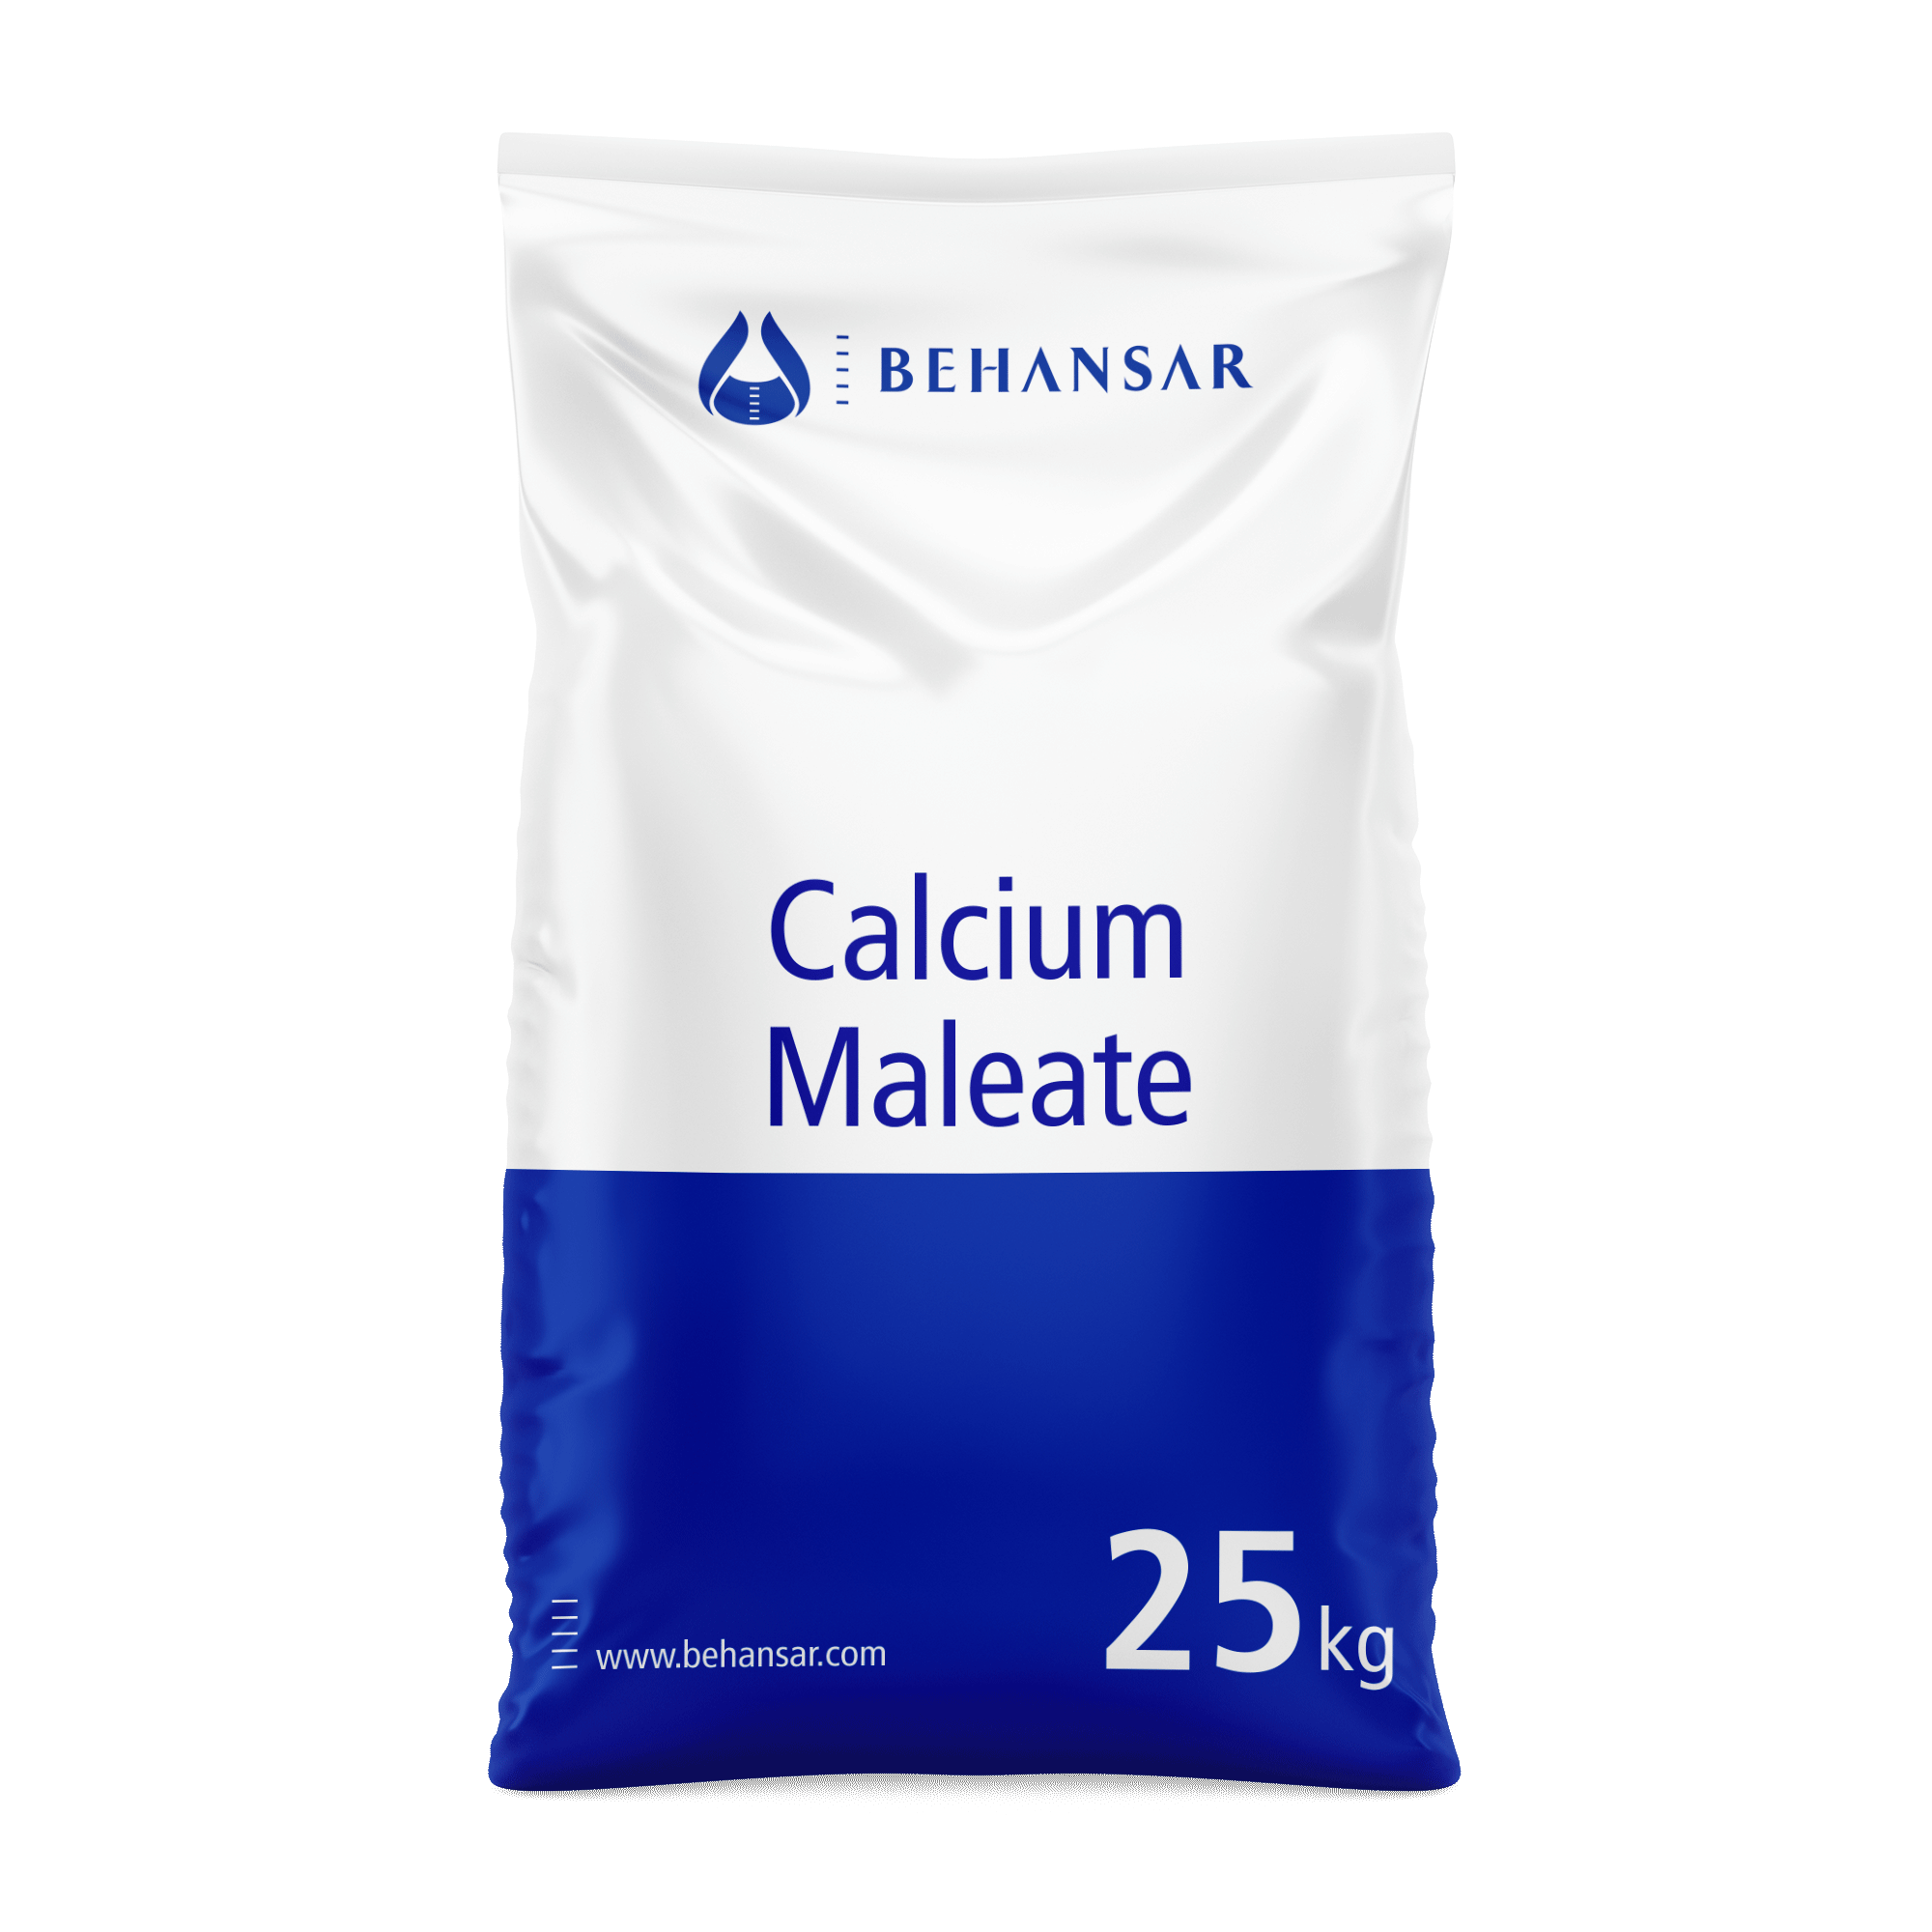 Calcium Maleate is one of the products of Behansar Co